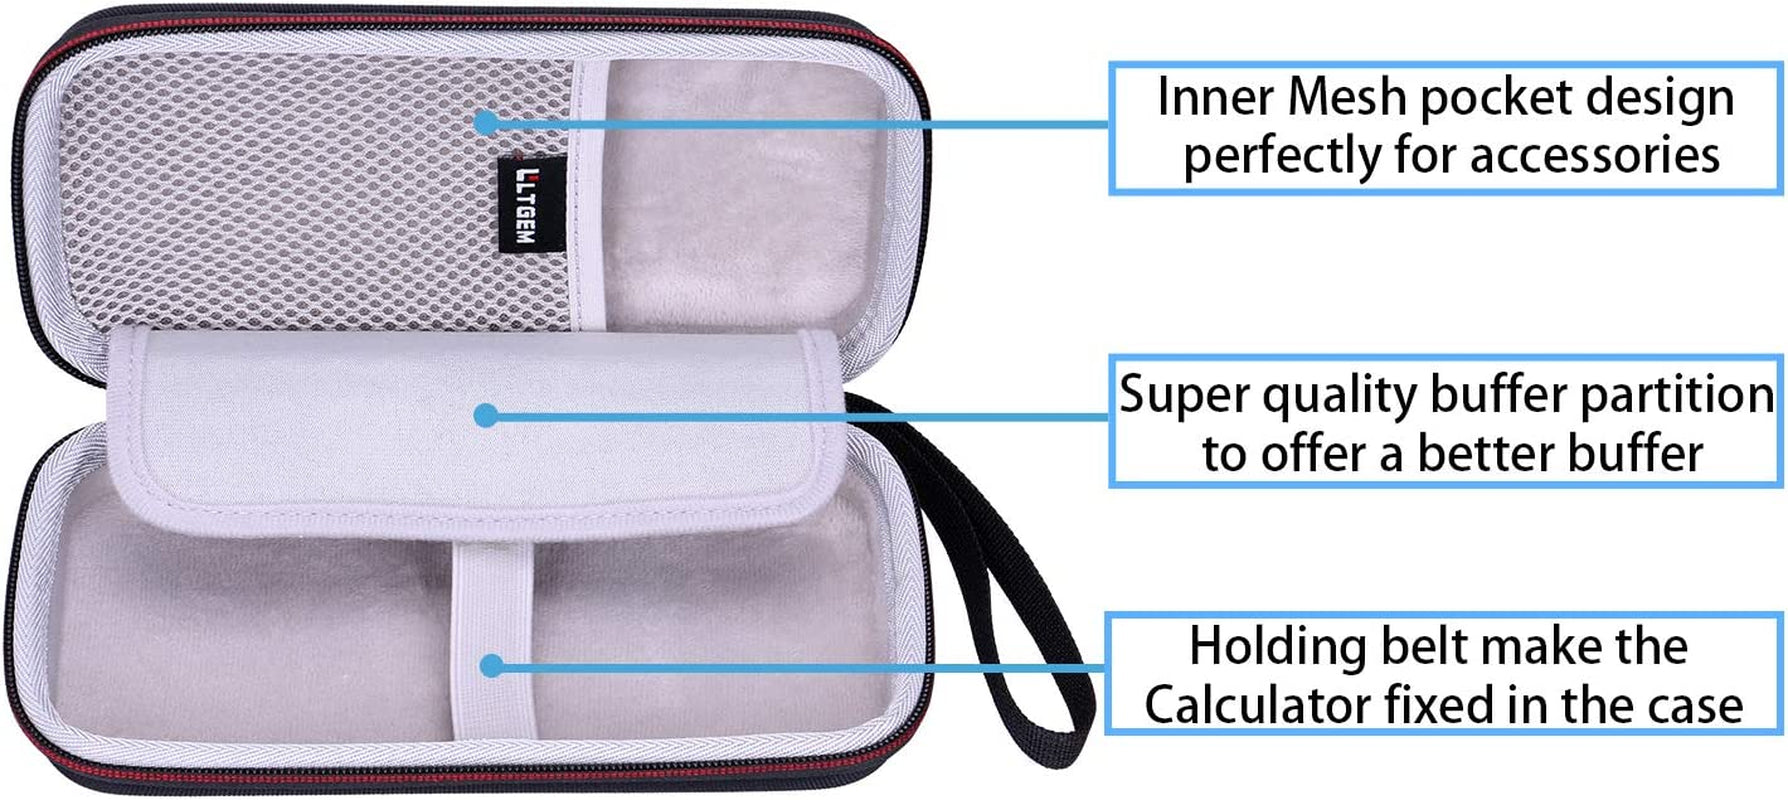 EVA Hard Case for Texas Instruments Ti-Nspire CX &Ti-Nspire CX II Graphing Calculator - Travel Protective Carrying Storage Bag